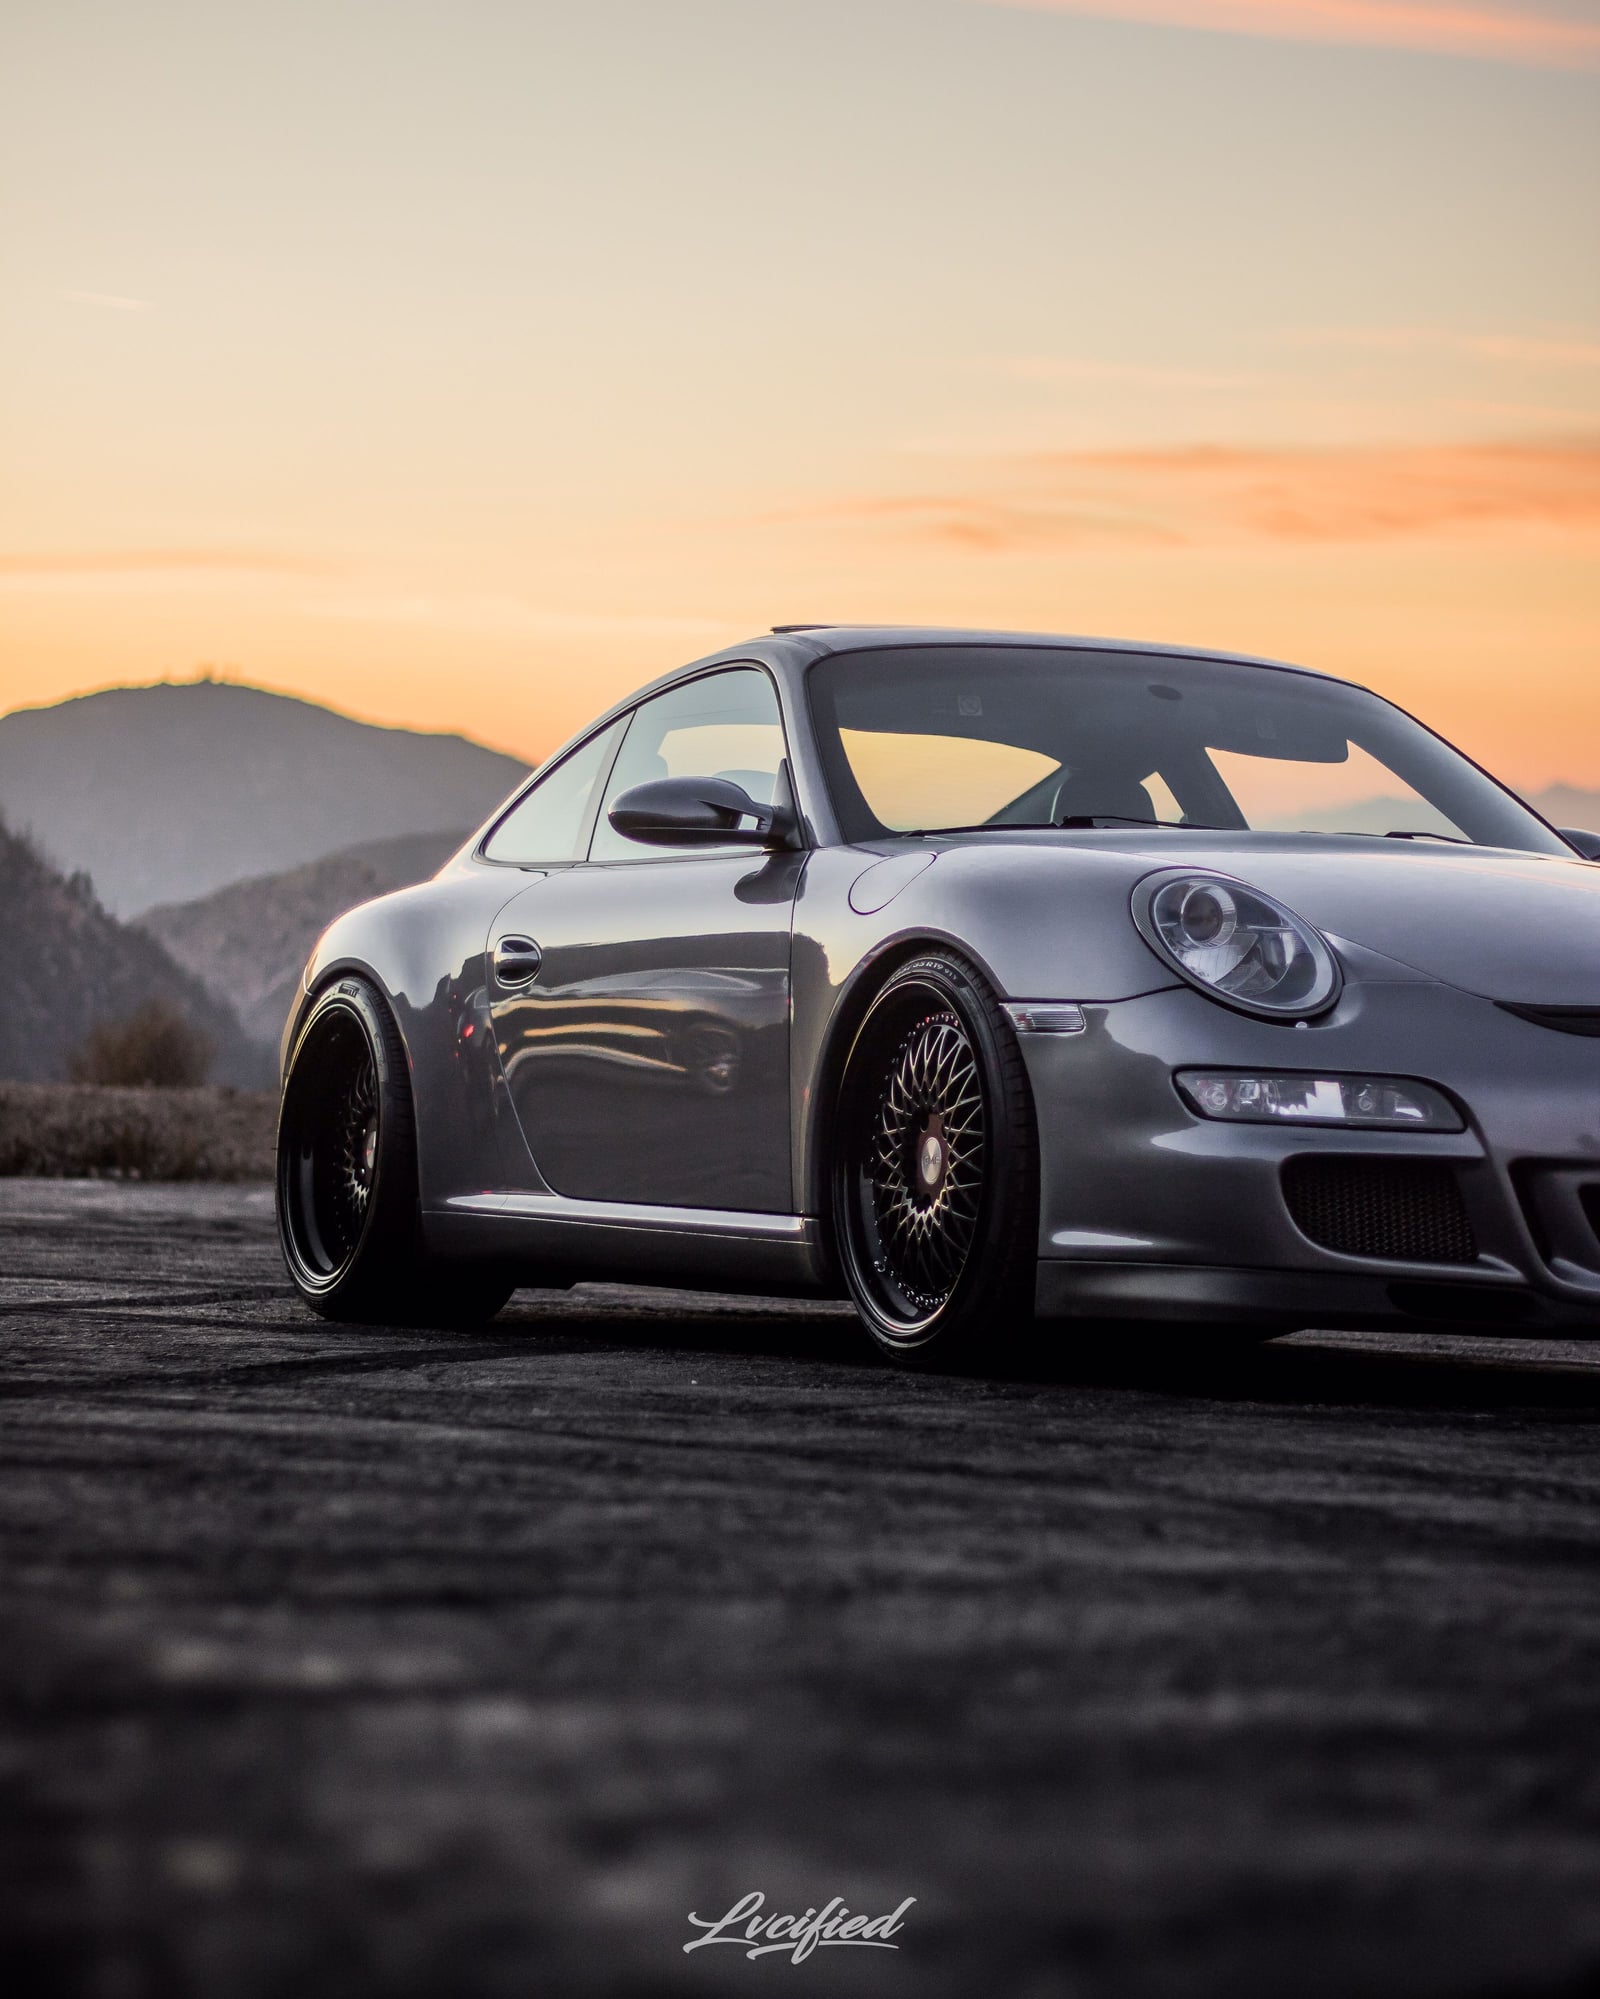 Wheels and Tires/Axles -  - Used - 2005 to 2019 Porsche Carrera - Palmdale, CA 93551, United States